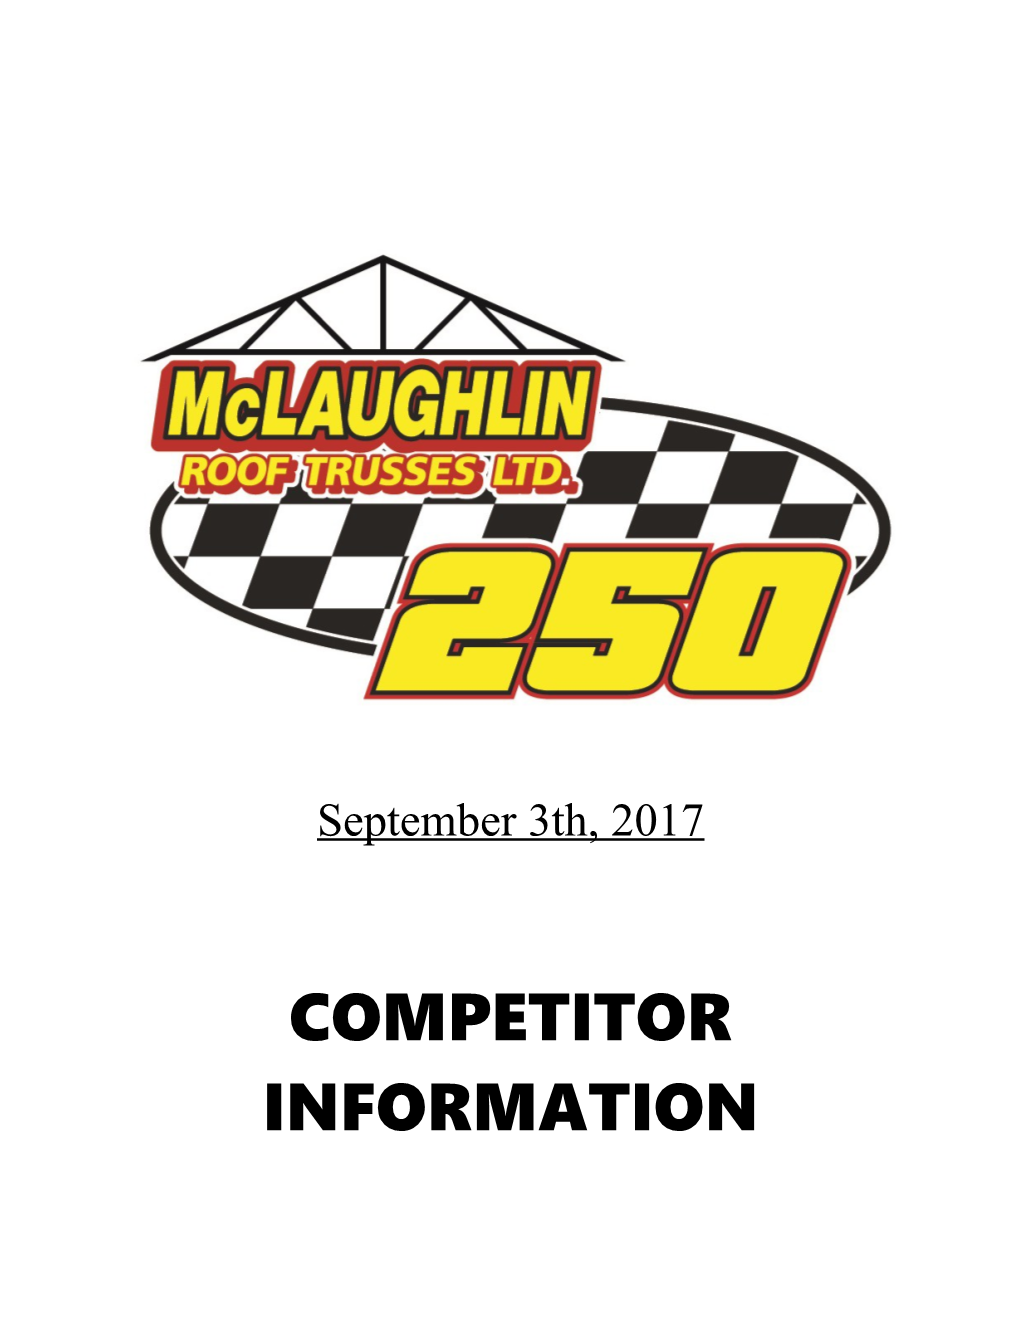 Competitor Information